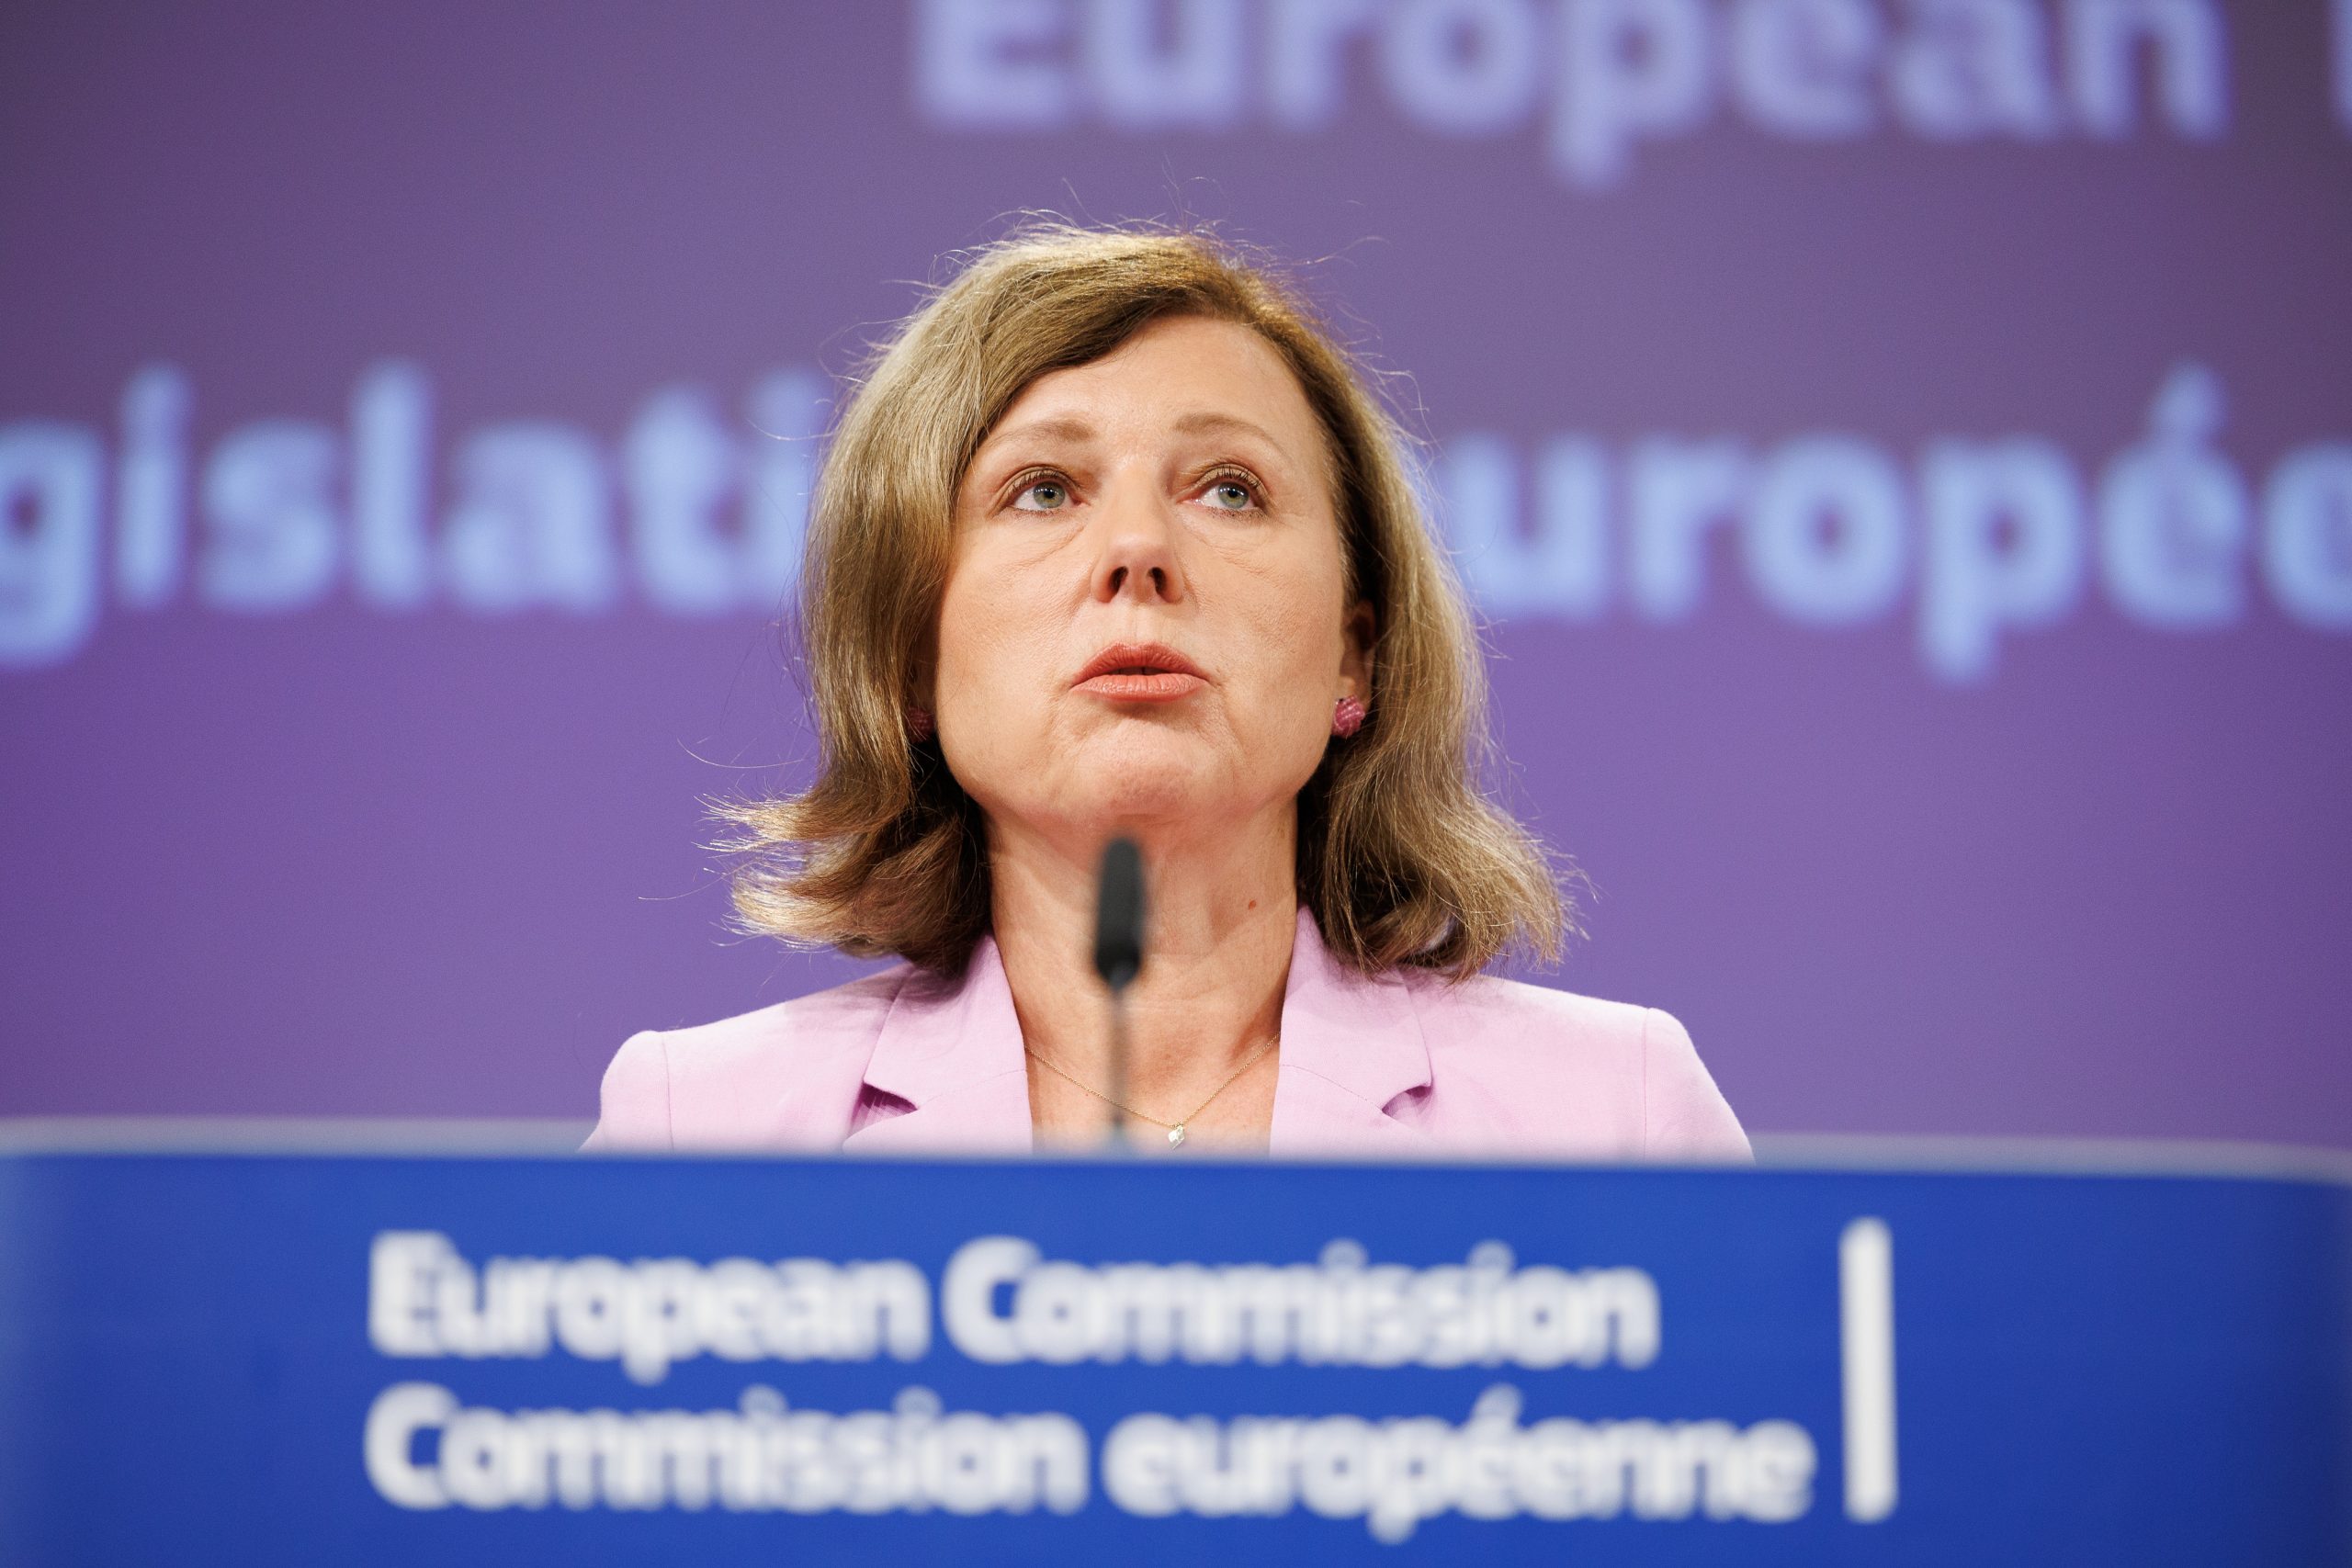 EU Commissioner Sees the Hungarian Electorate as a Hindrance to Democracy